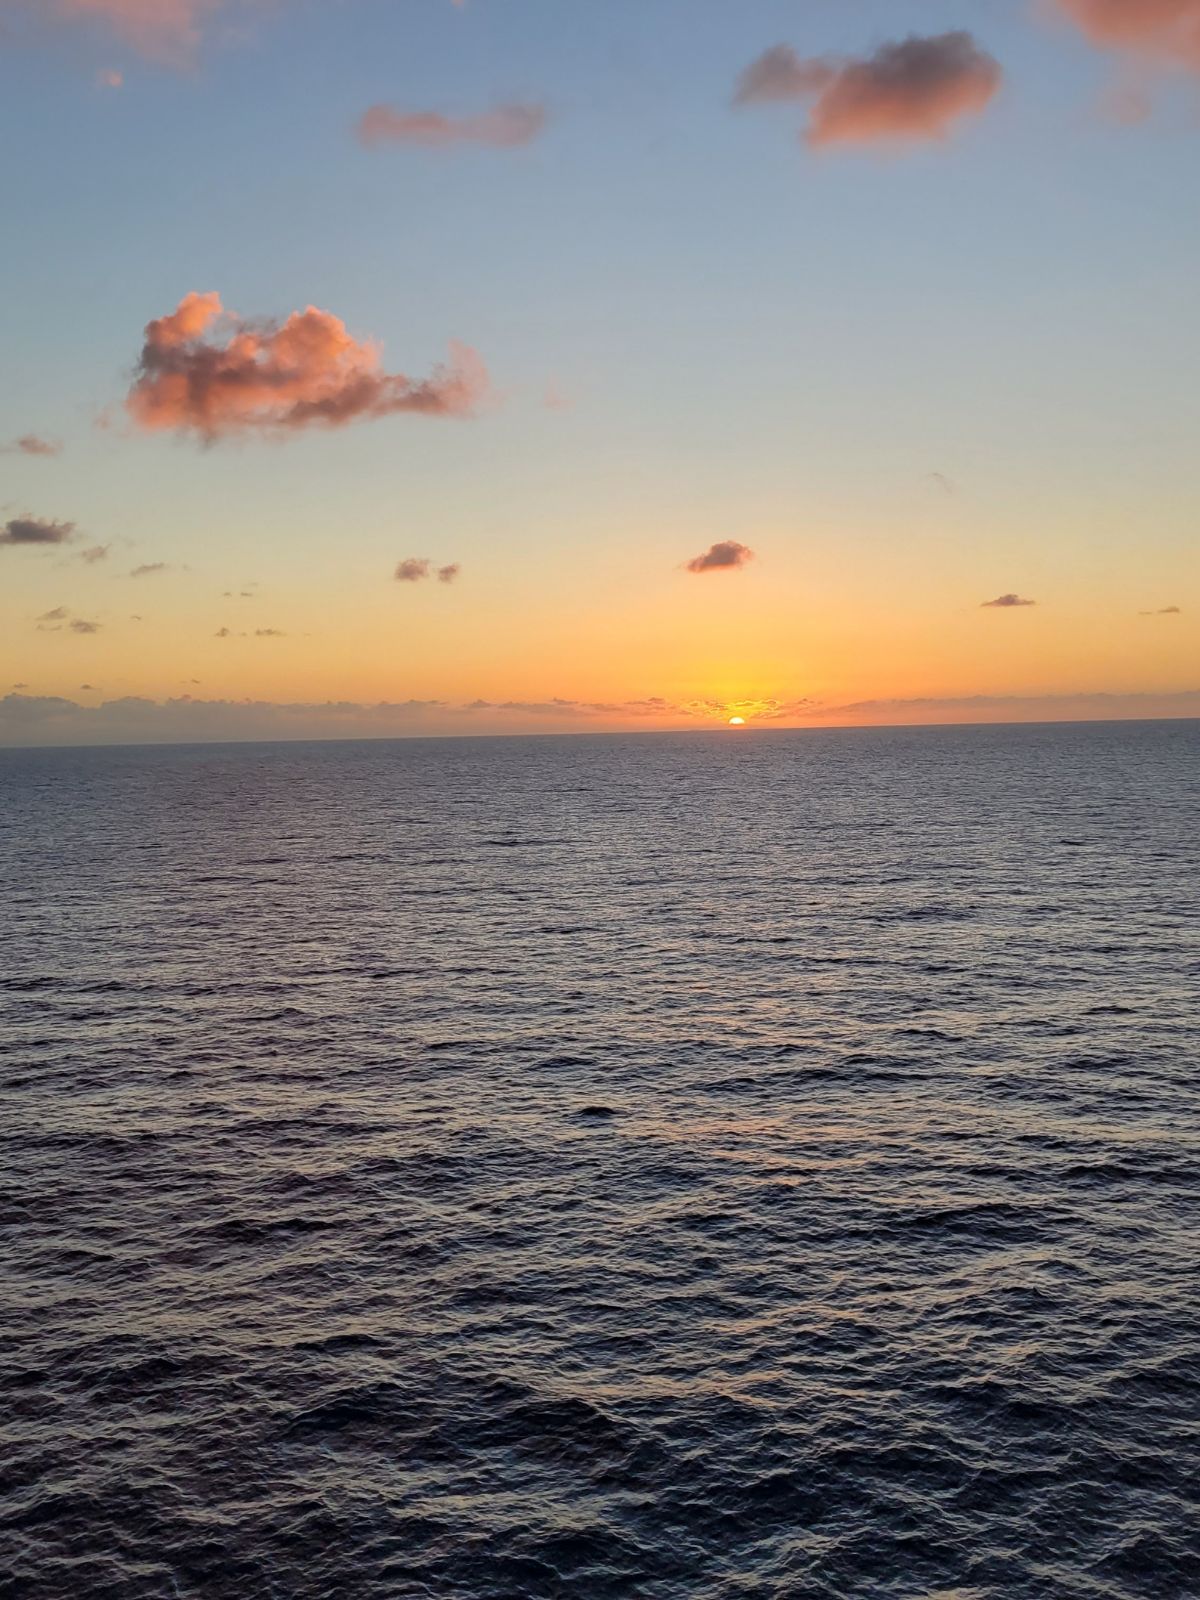 A view of the sunset from the deck of the Oasis of the Seas cruise.